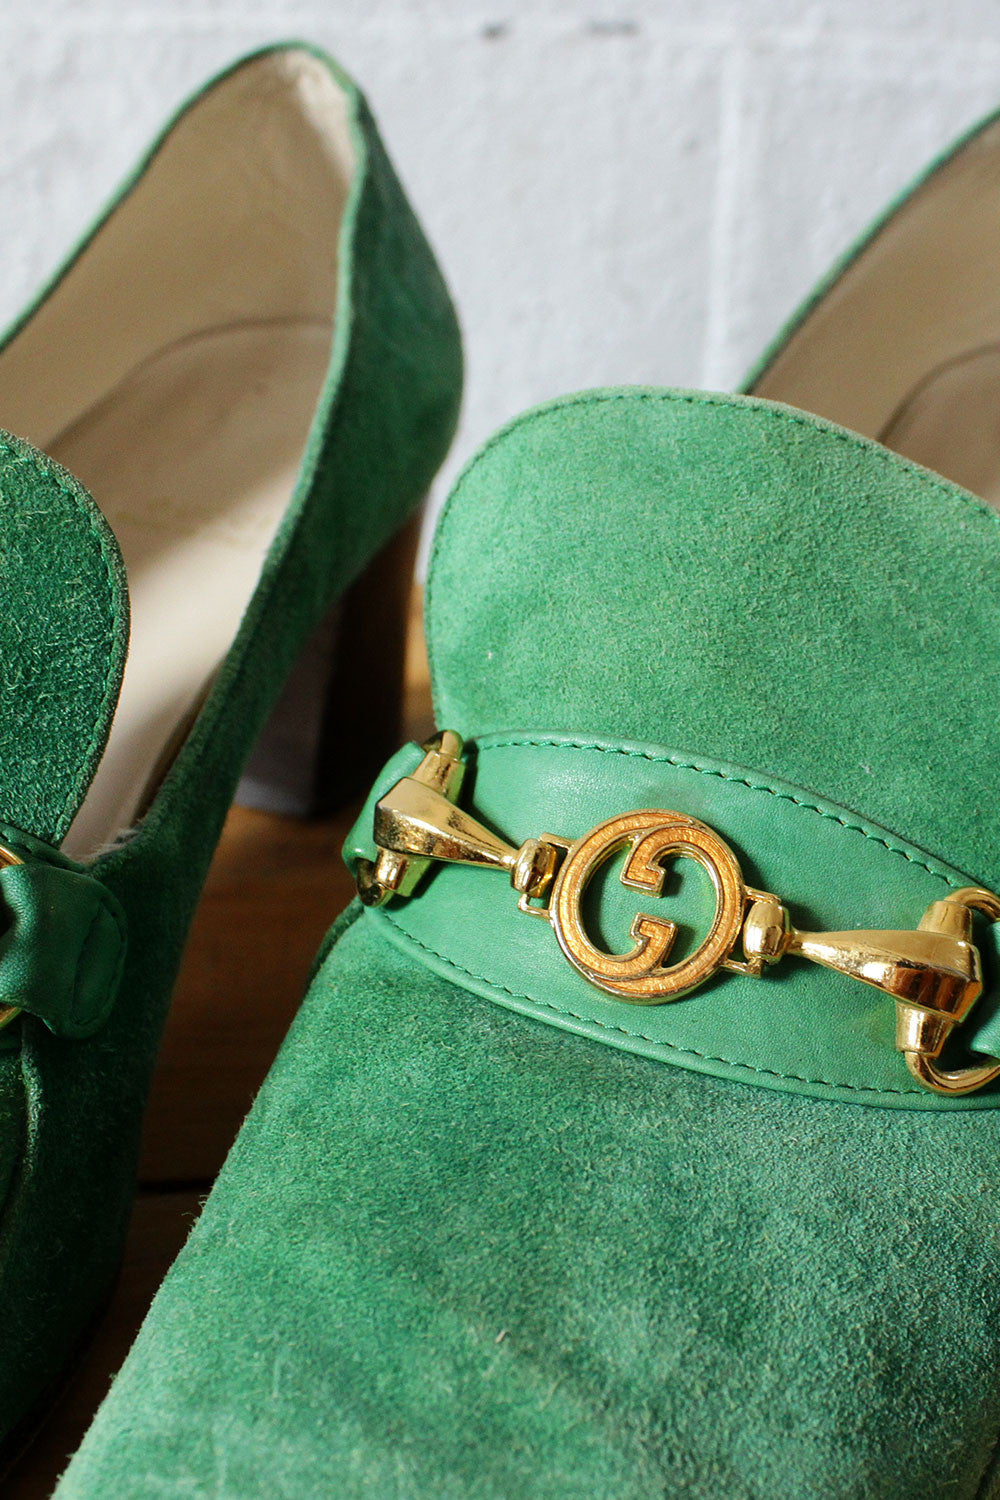 Gucci Moss Green Suede Heeled Loafers 8 1/2